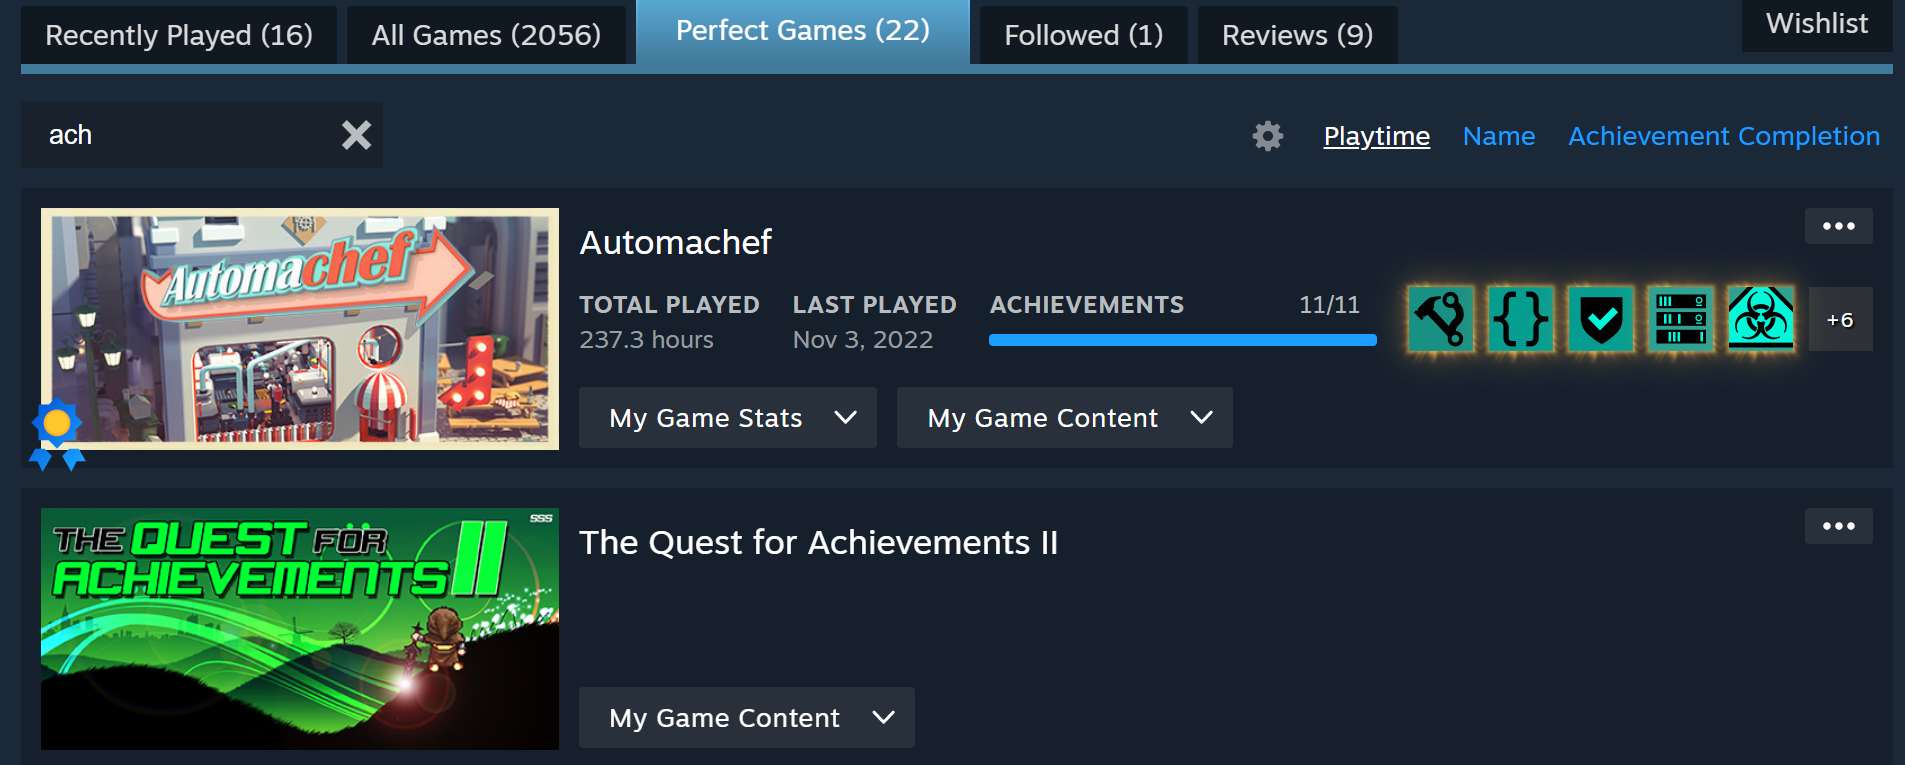 Been trying to get rid of this for a while, its already gone from my library and steam store but it still pollutes my perfect games